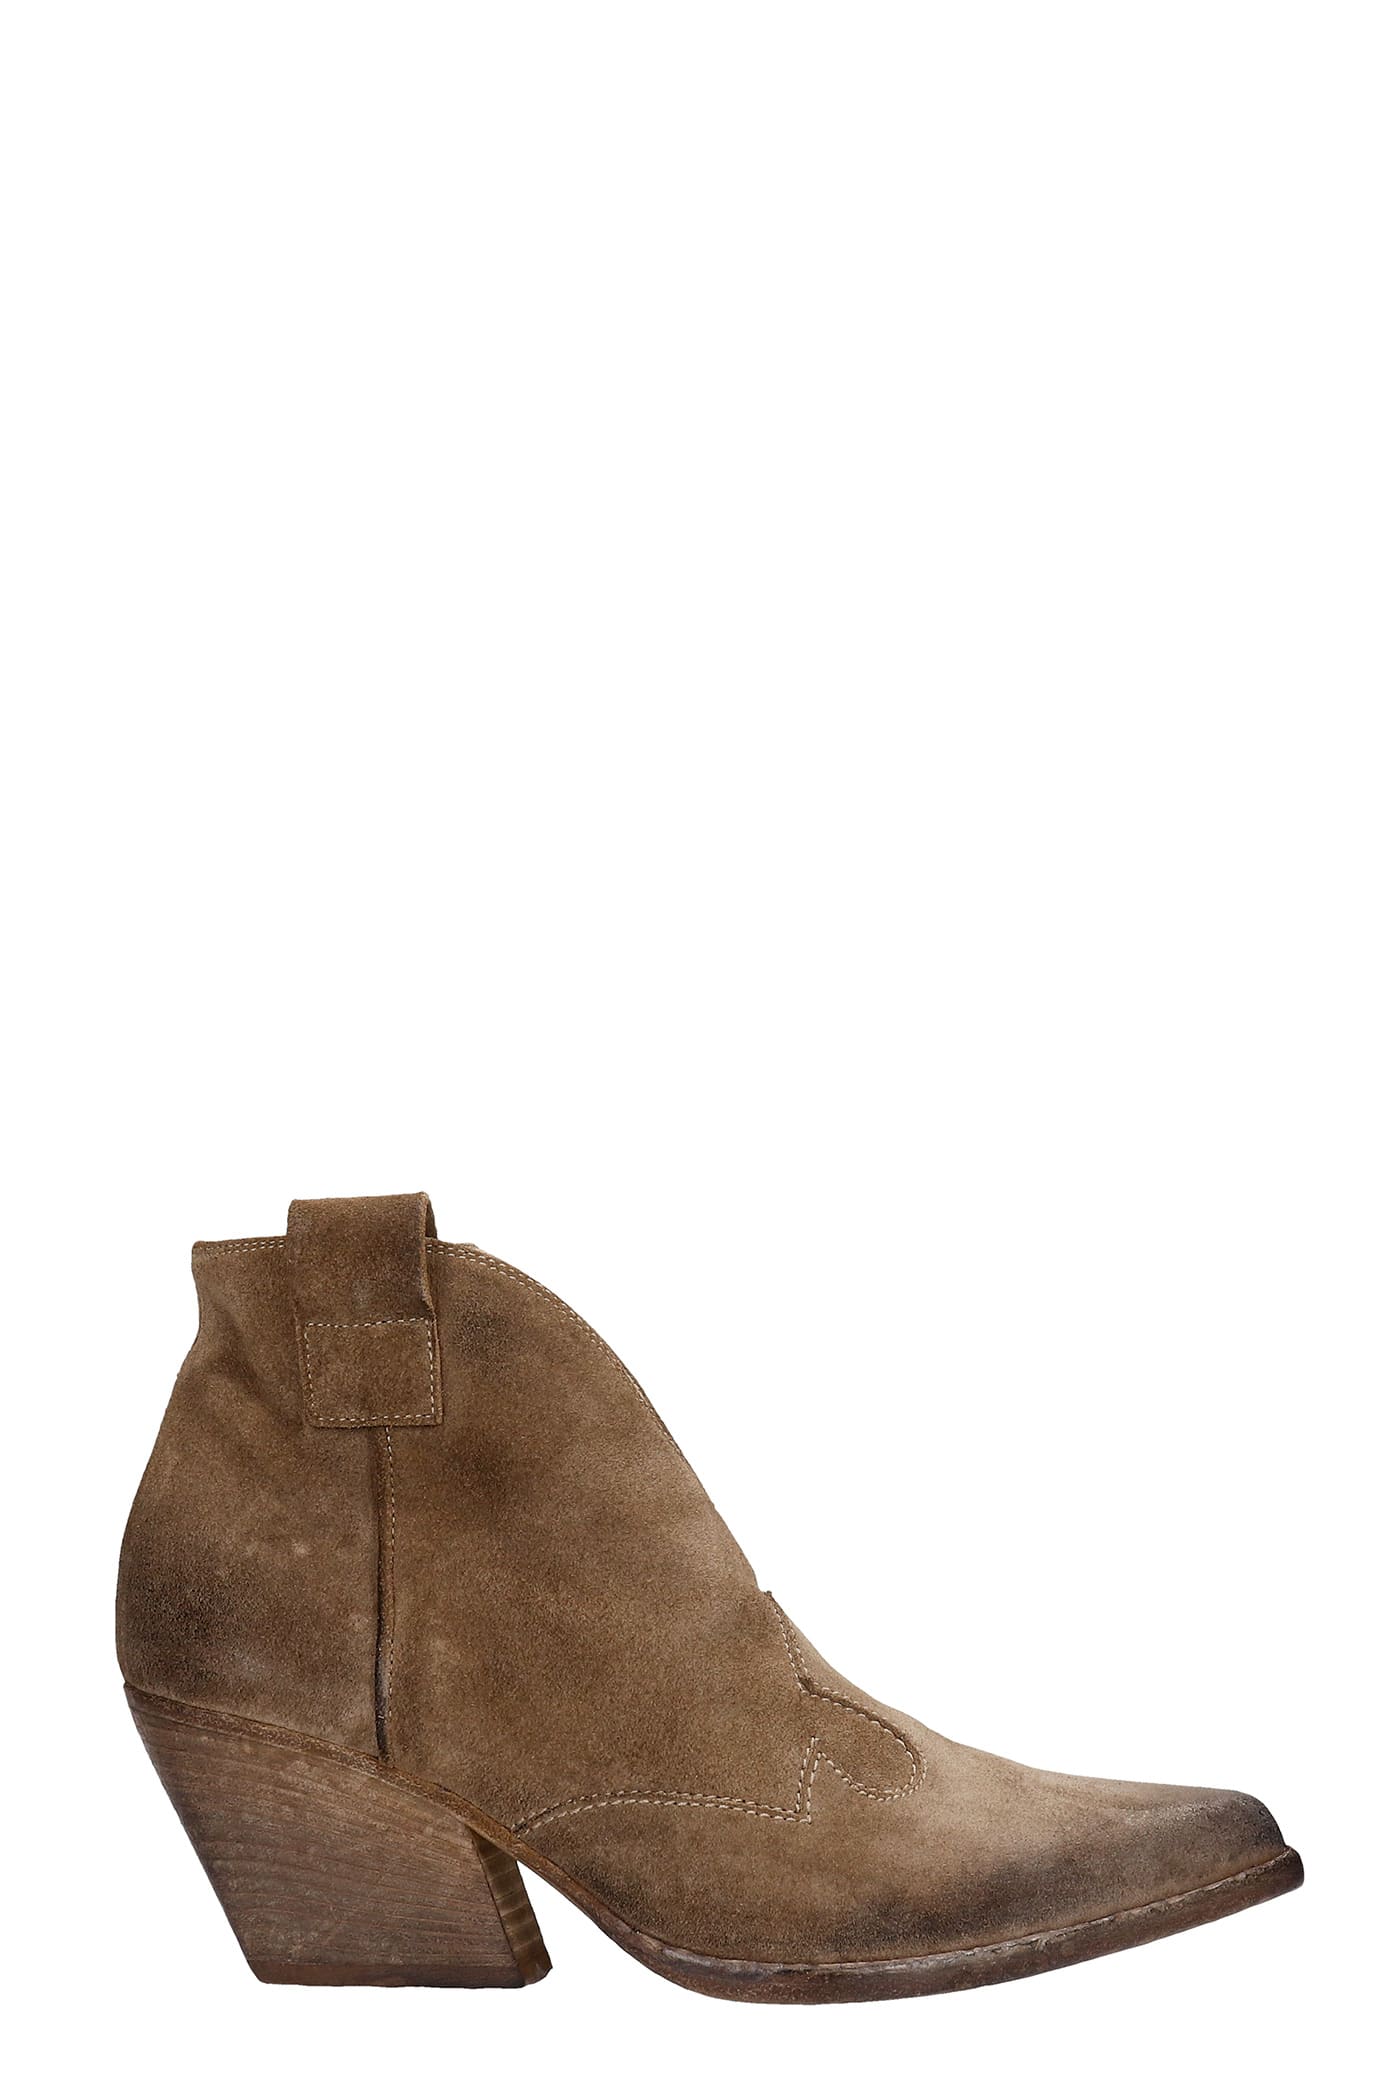 Elena Iachi Texan Ankle Boots In Beige Suede